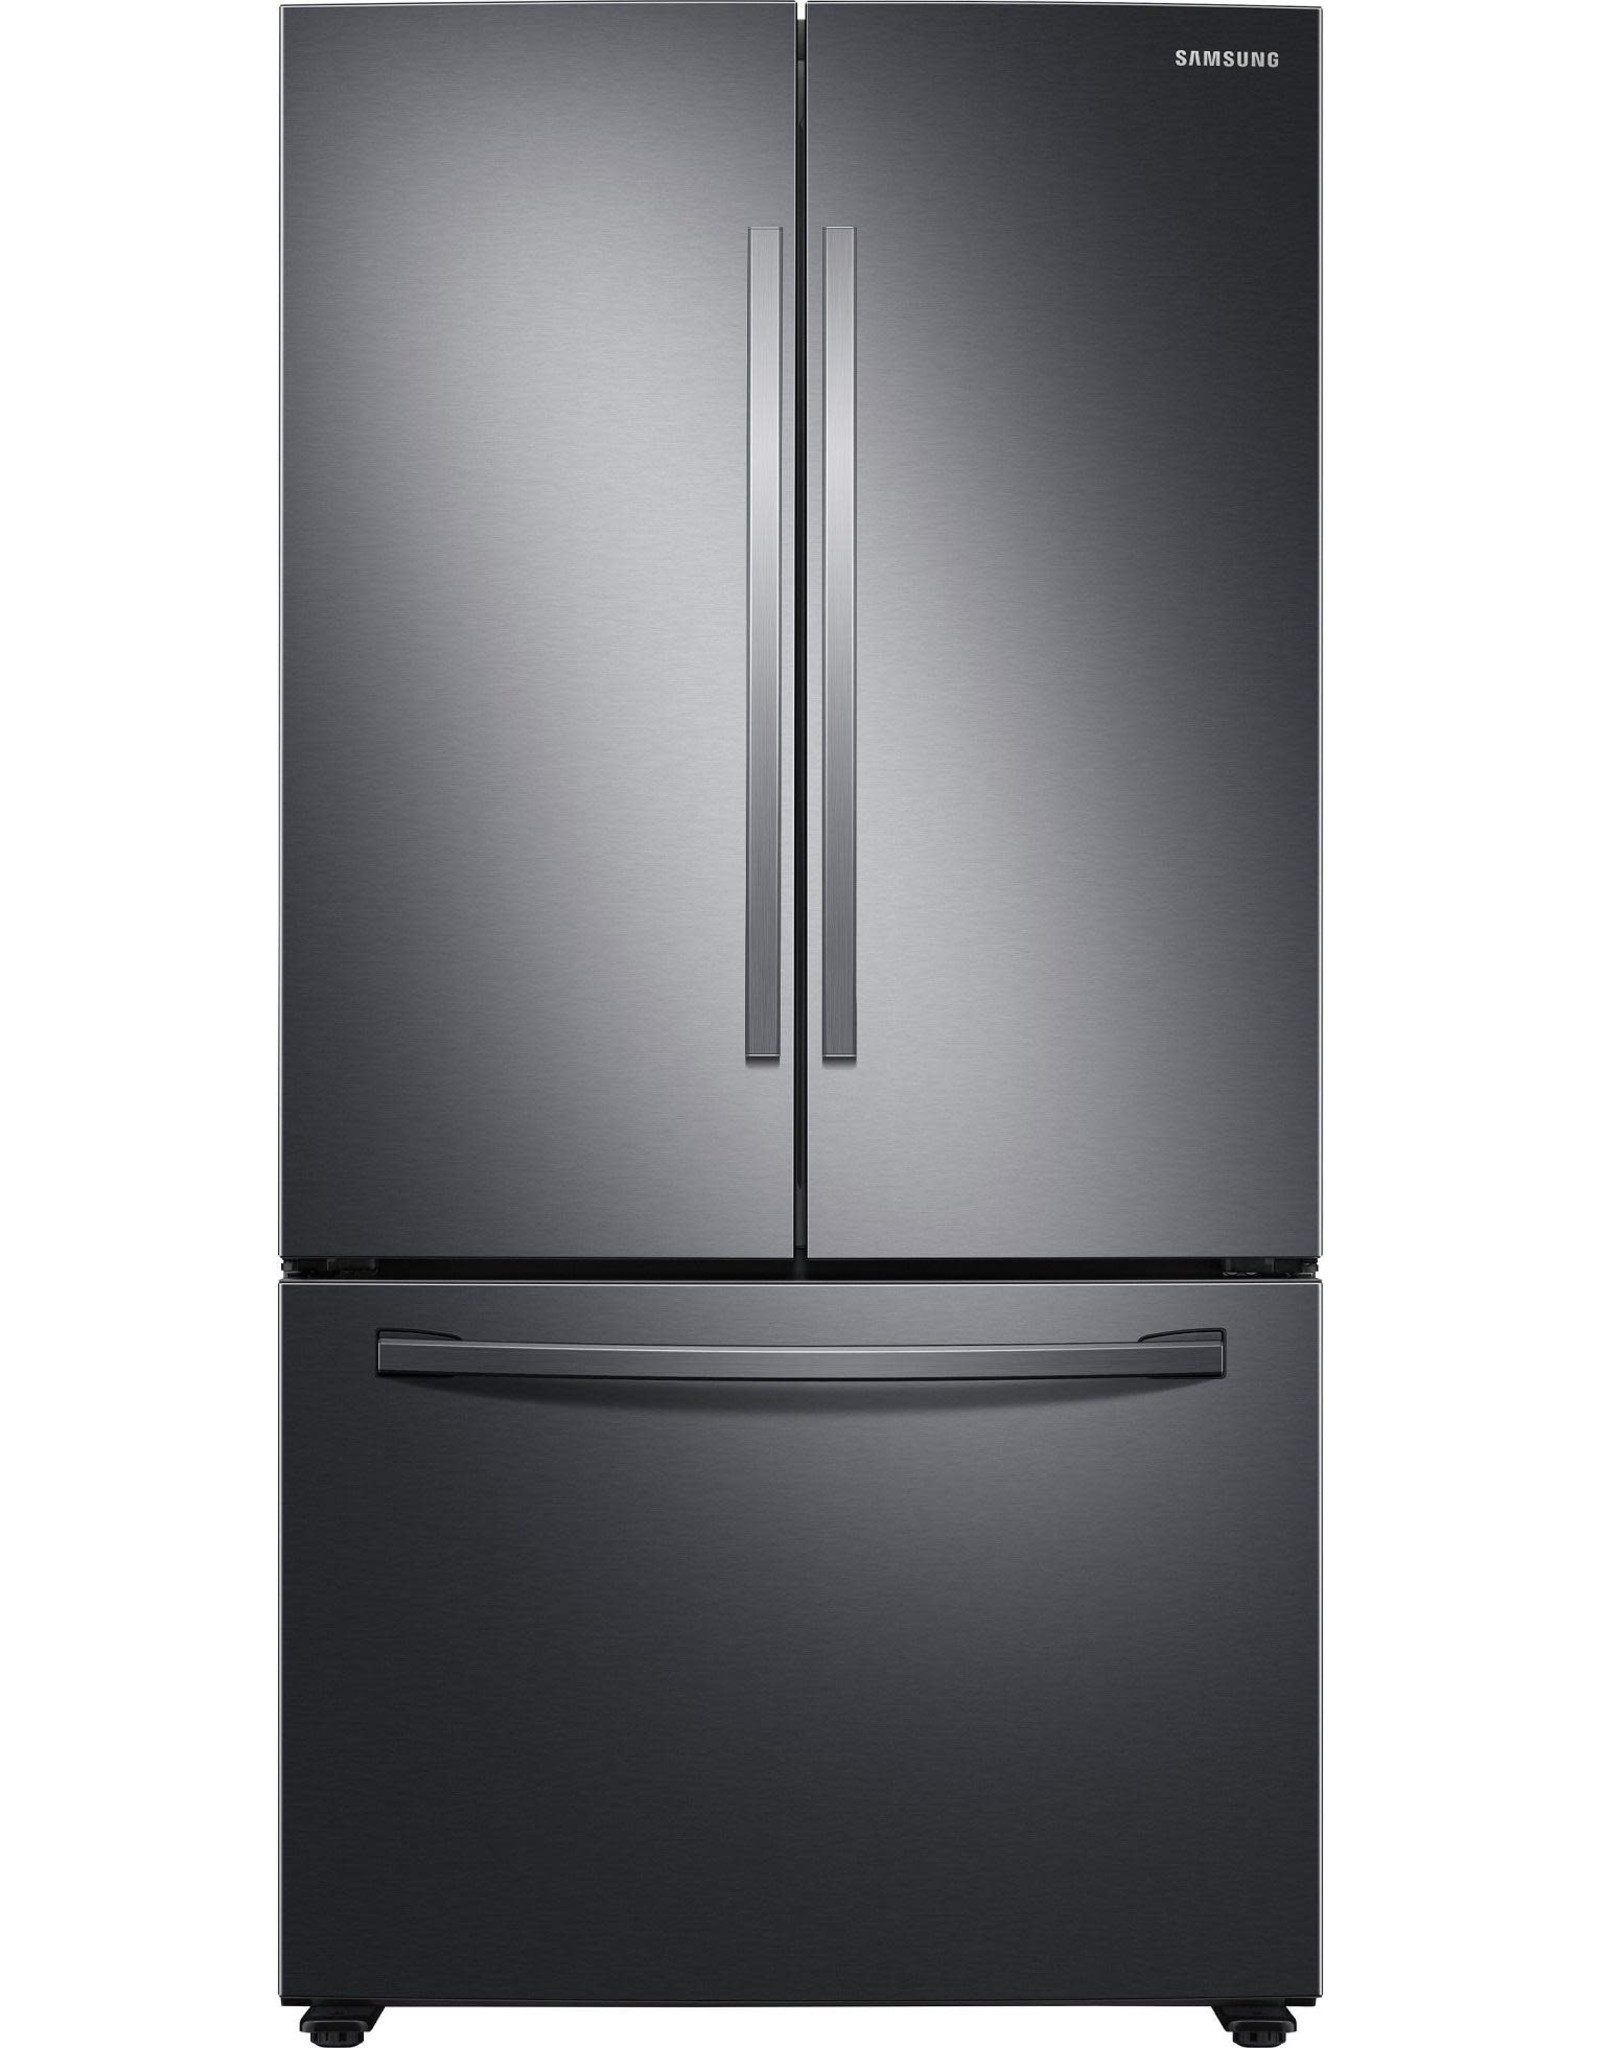 SAMSUNG NEWR F28T5021SG 28.2 cu. ft. French Door Refrigerator in Black Stainless Steel with Autofill Water Pitcher